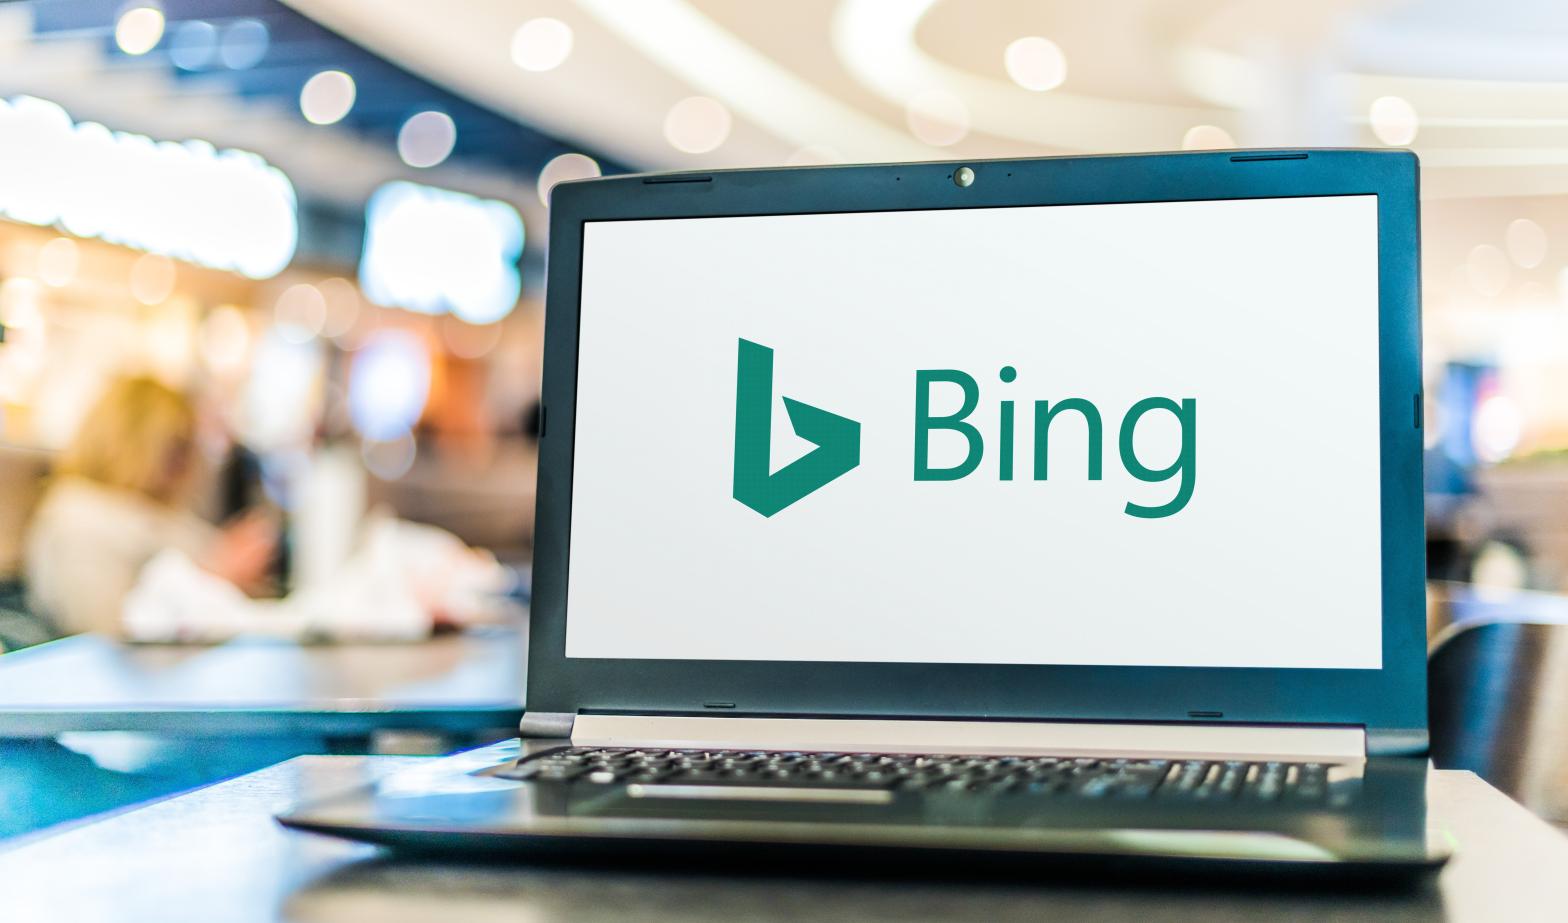 Bing was once heralded as the Google alternative, but has since floundered as Google's titular search engine has become a common fixture of digital infrastructure.  (Image: monticello, Shutterstock)